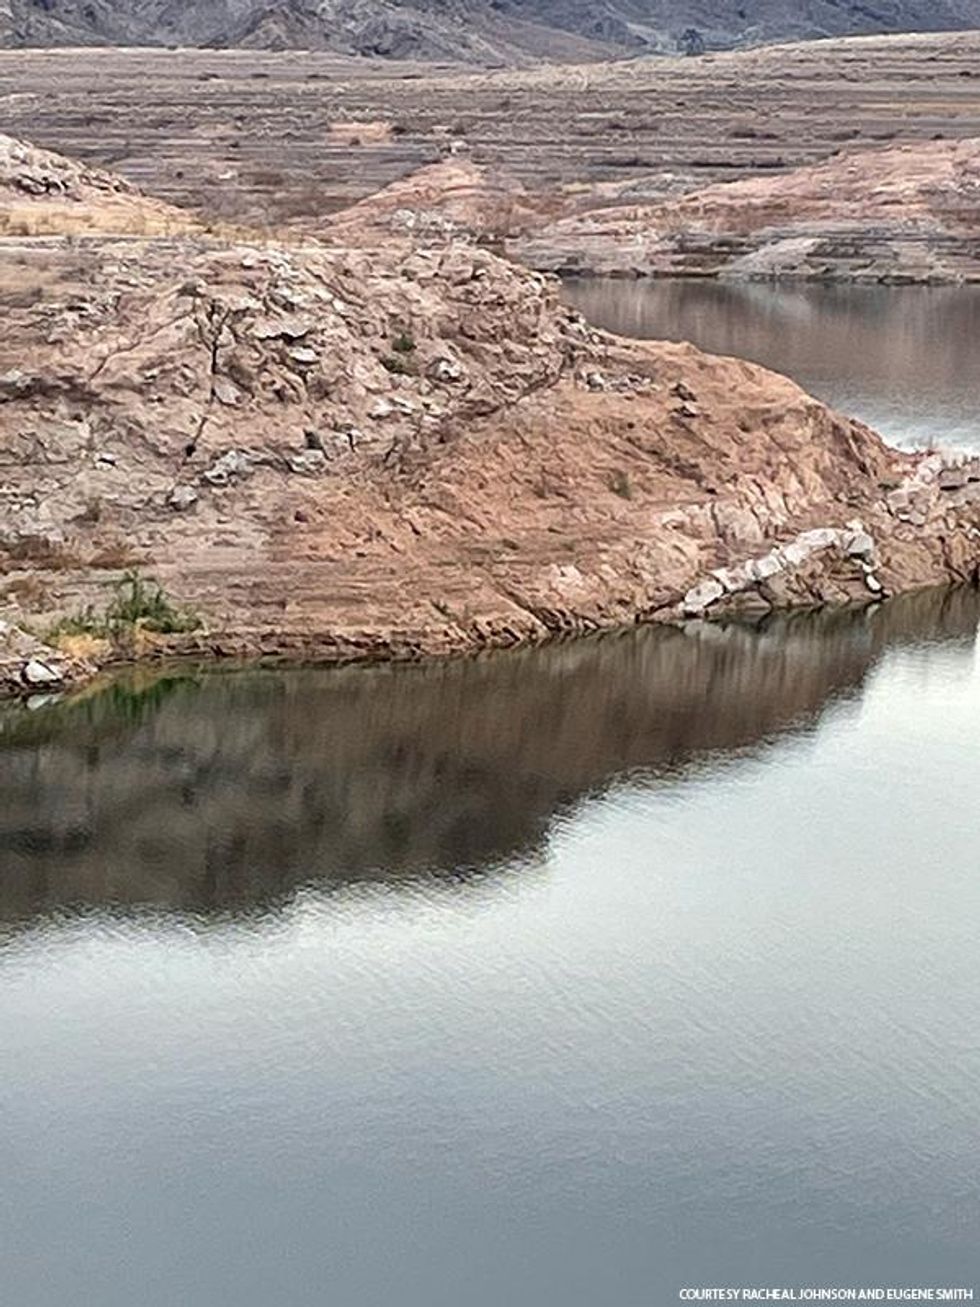 Low water levels in Lake Mead behind Hoover Dam revealed multiple eruptions over millions of years\u2026and it is only a matter of time before it happens again.